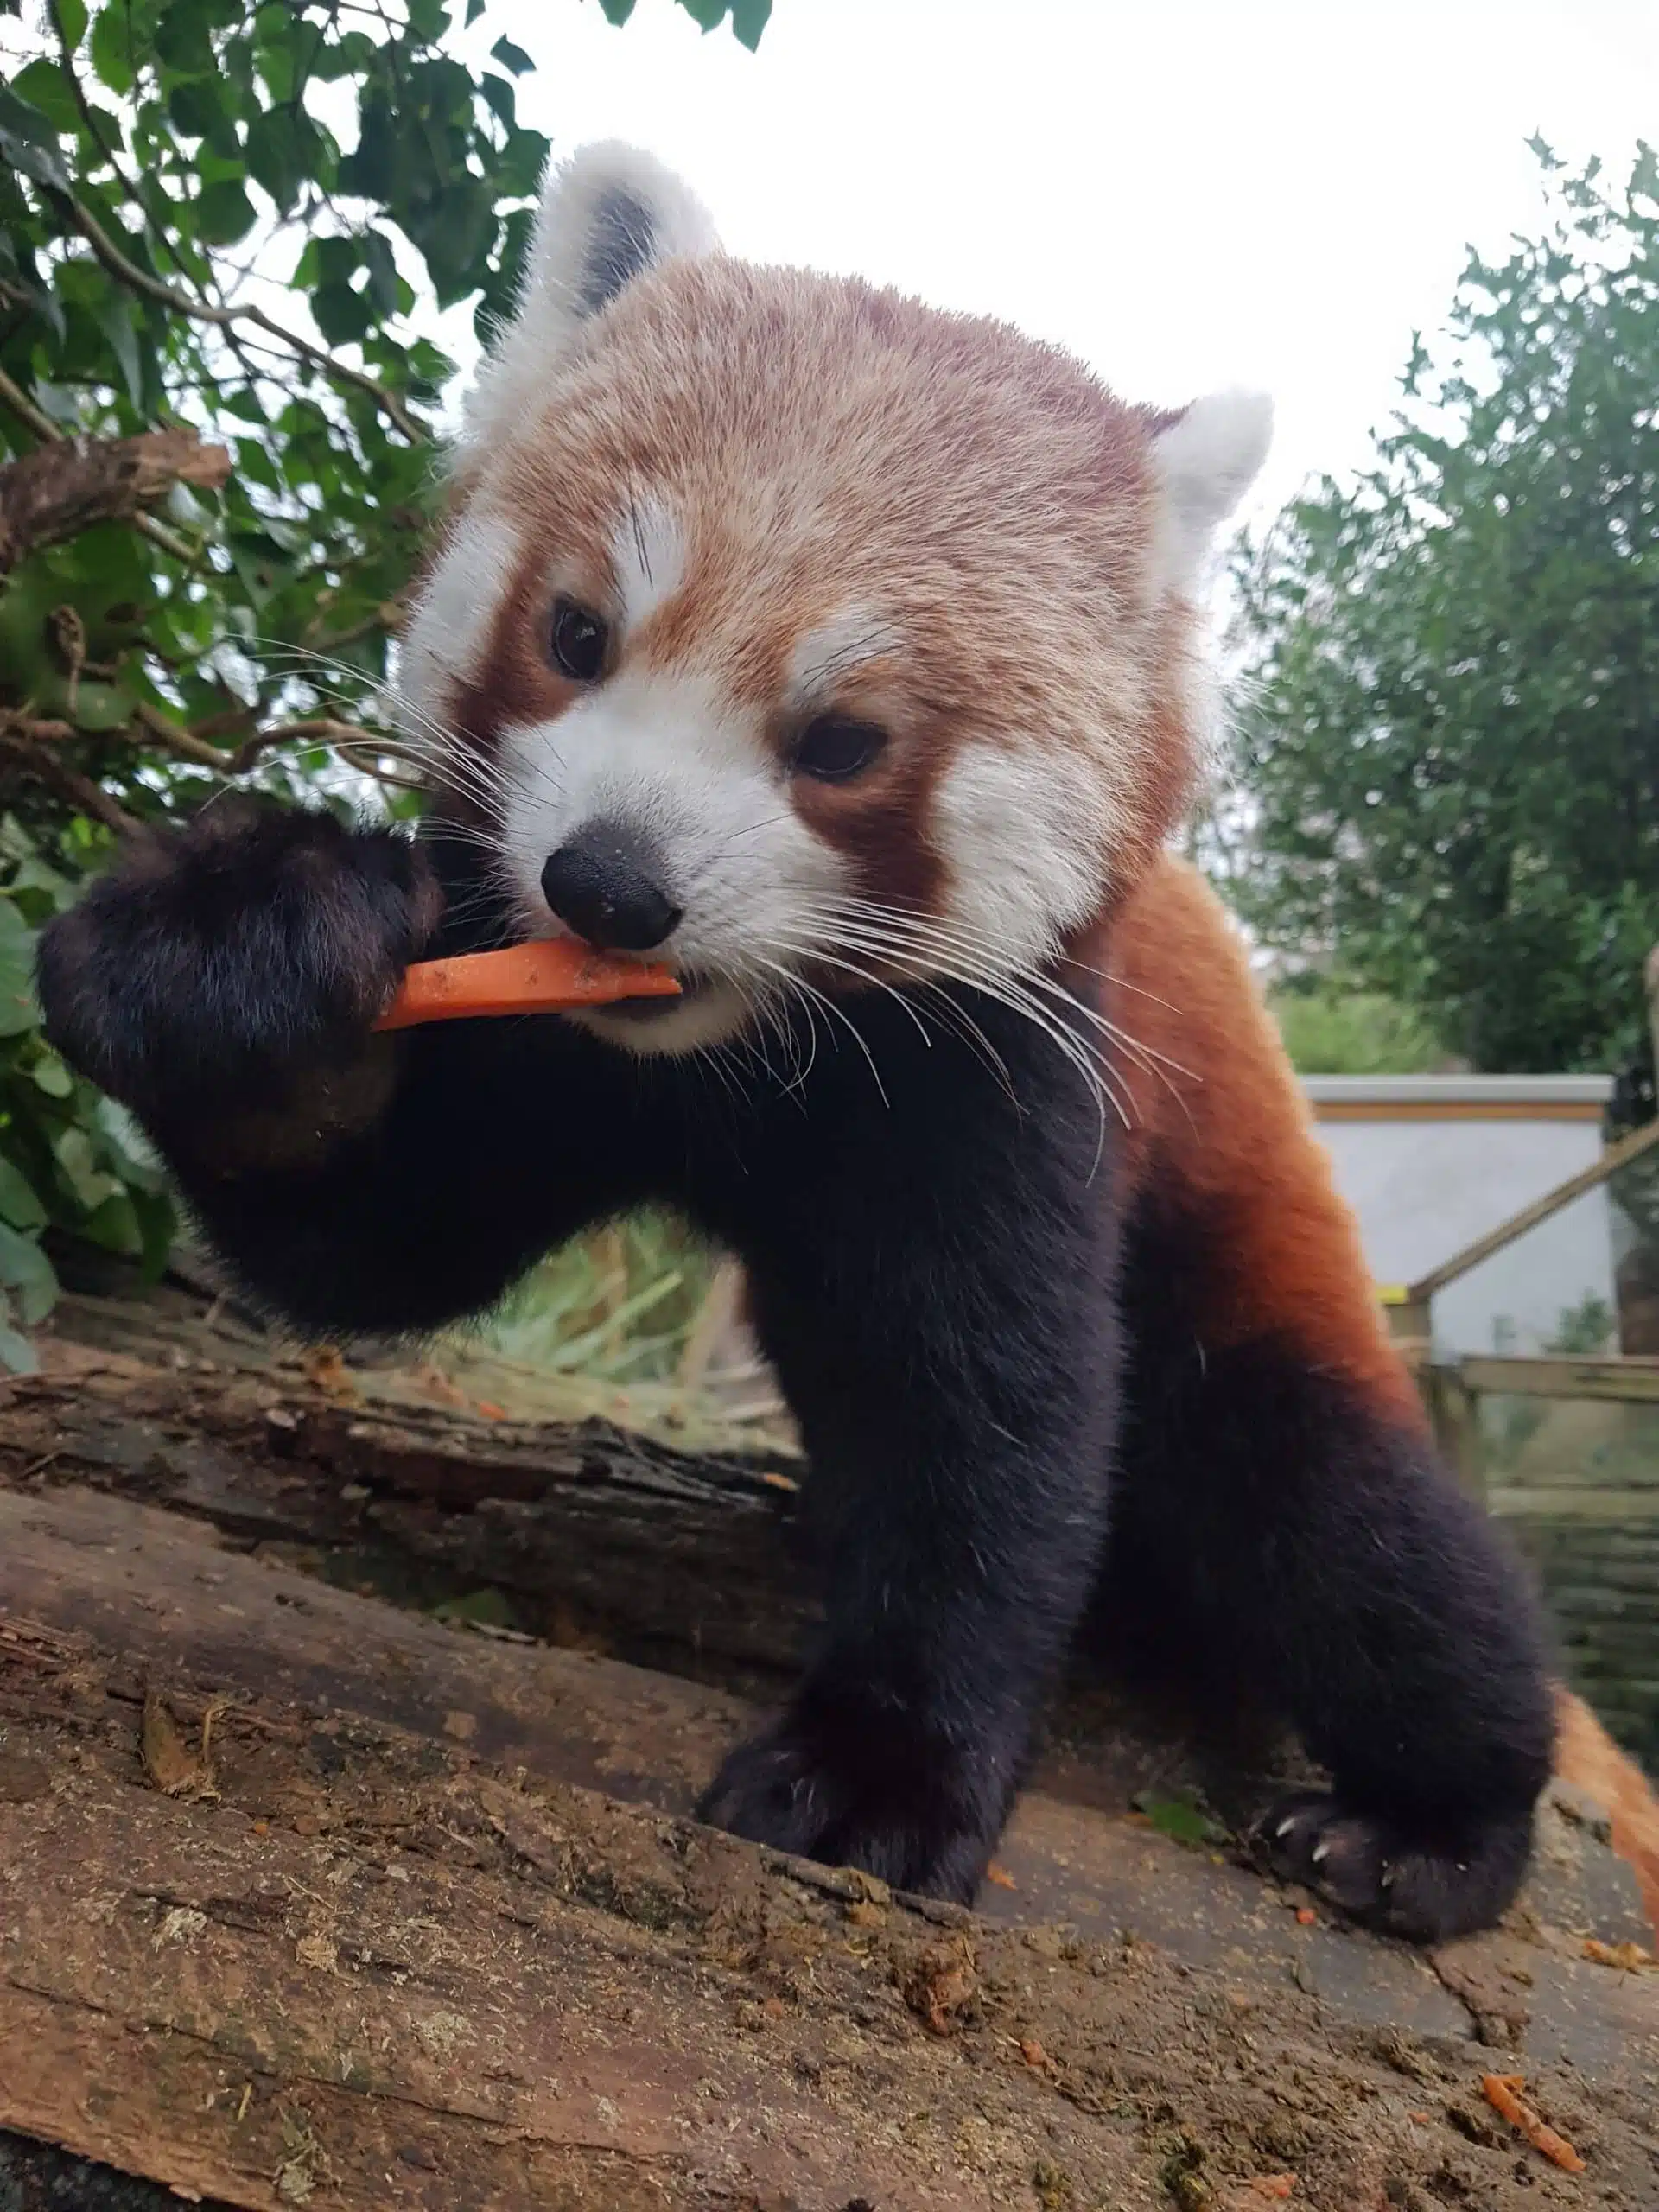 Newquay Zoo is turning red with its latest addition of a male red panda